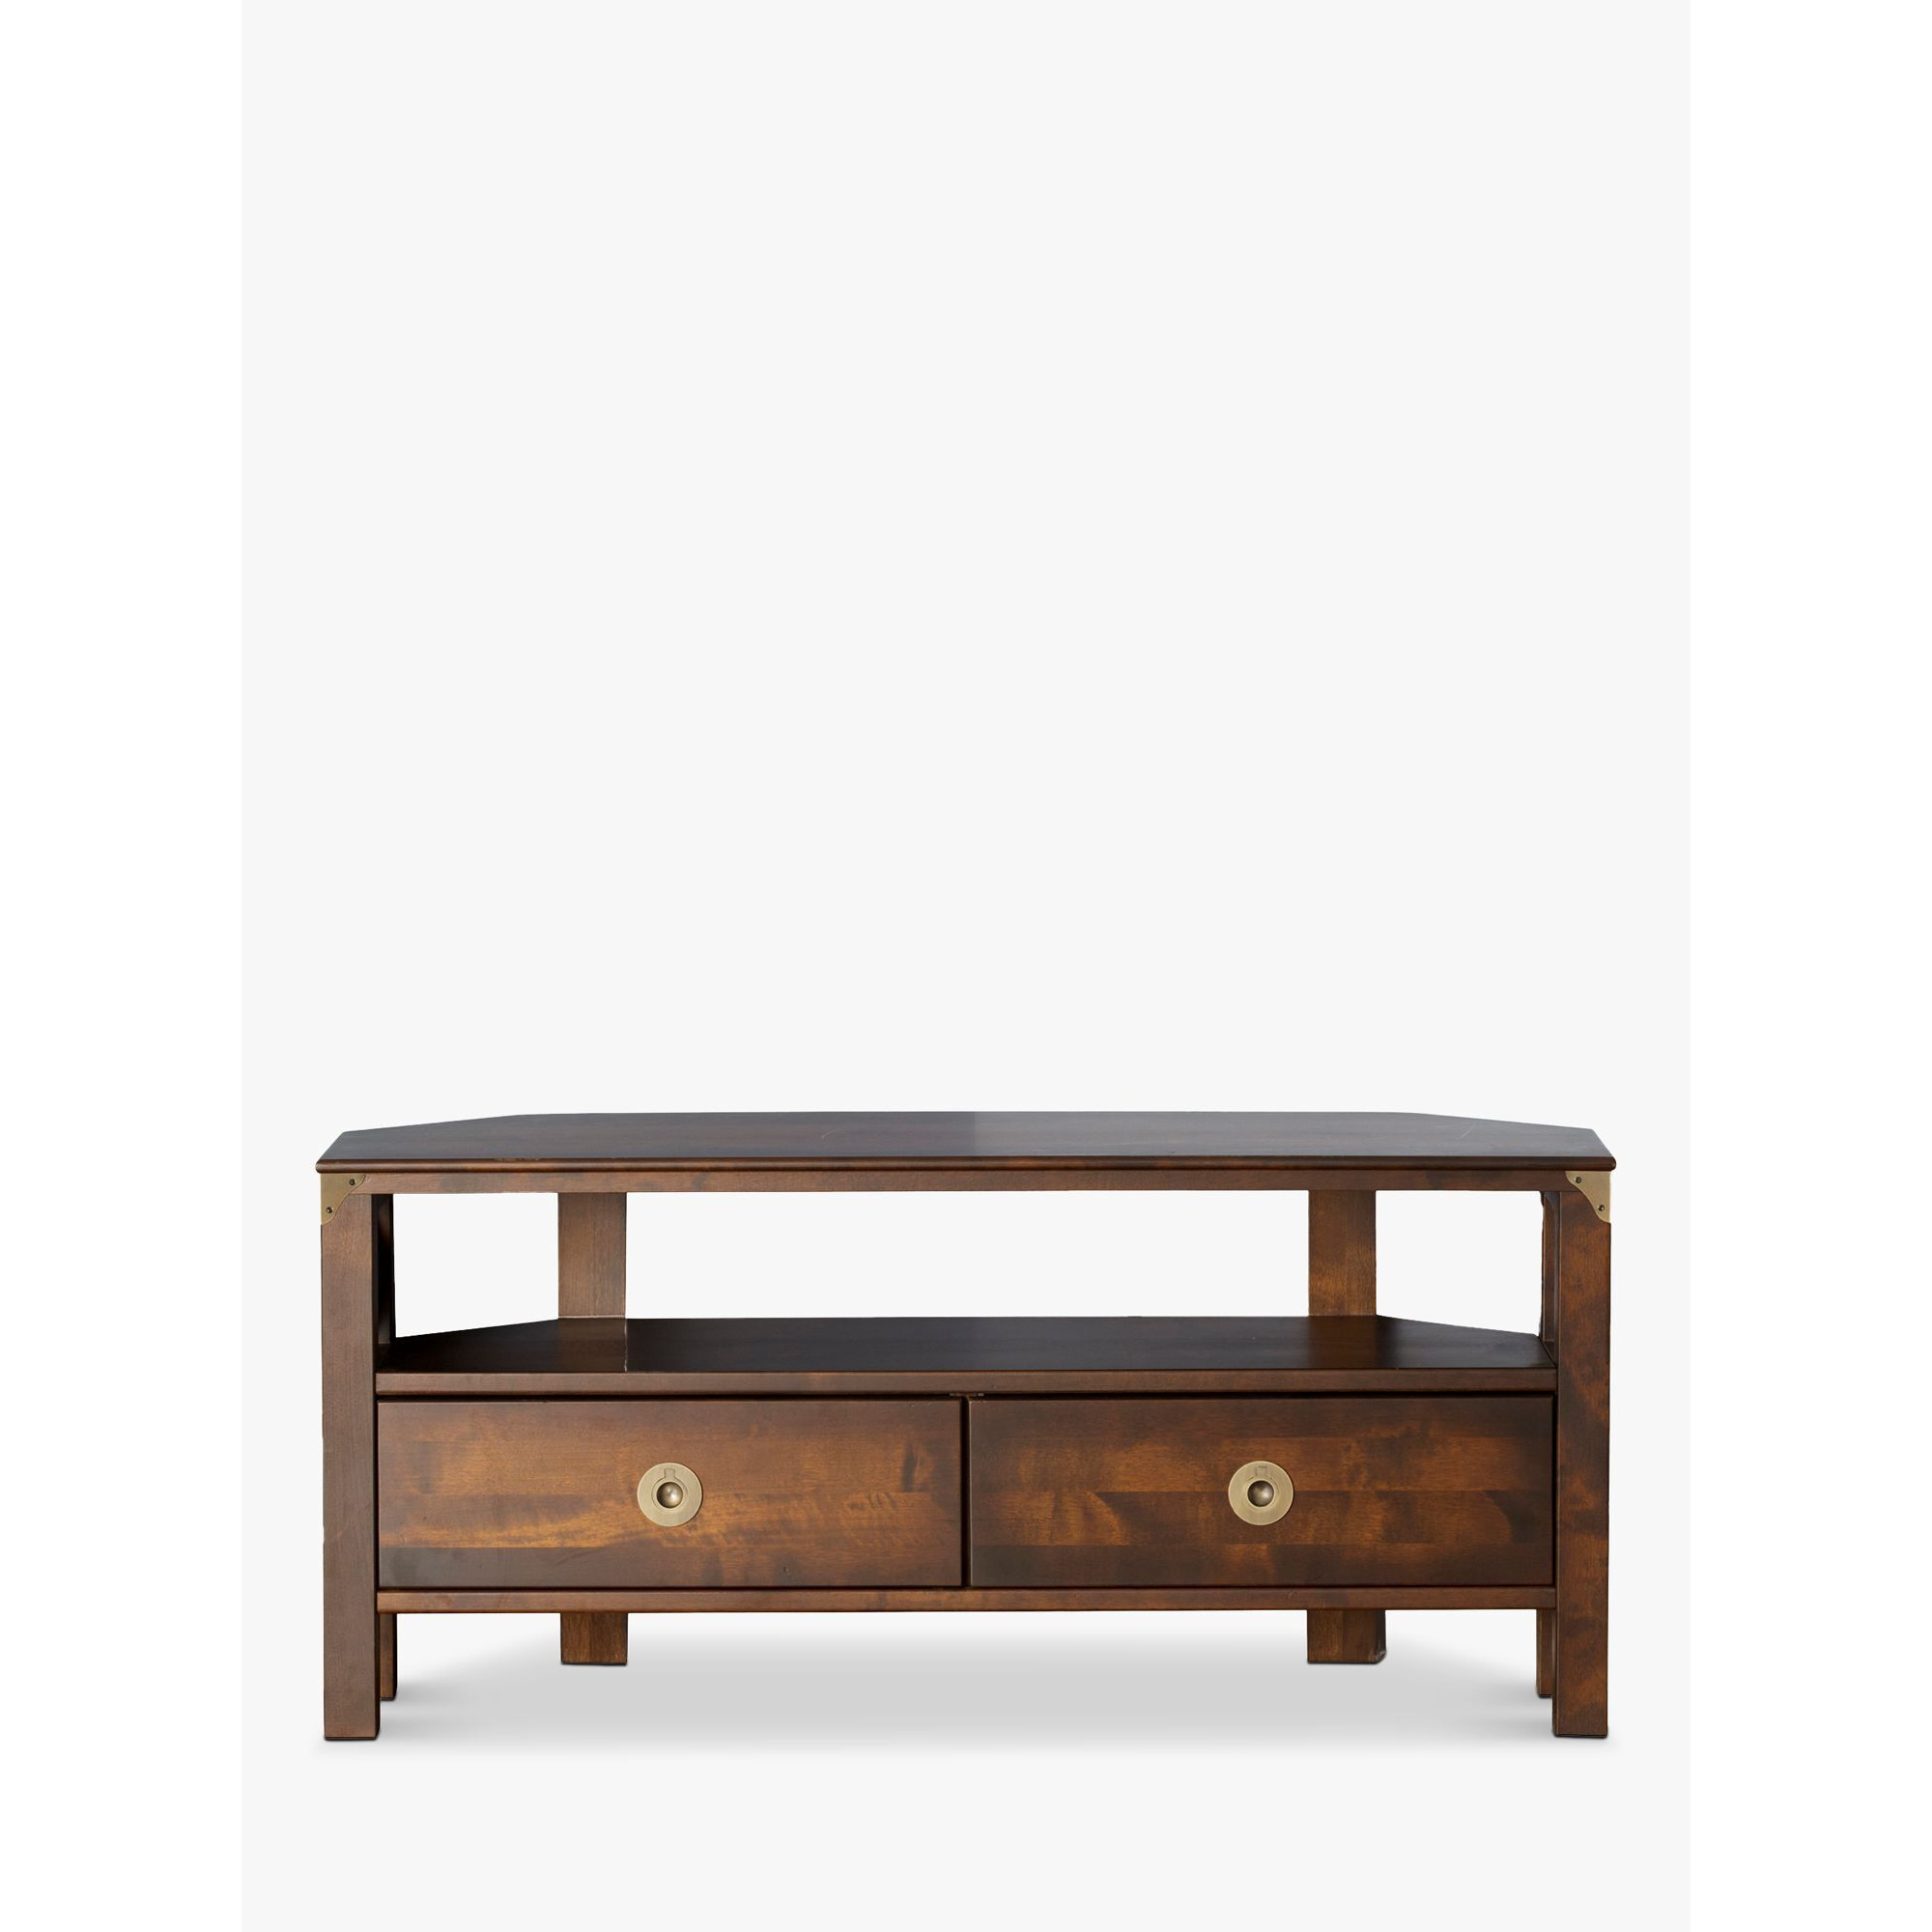 "Laura Ashley Balmoral Corner TV Stand for TVs up to 50""" - image 1